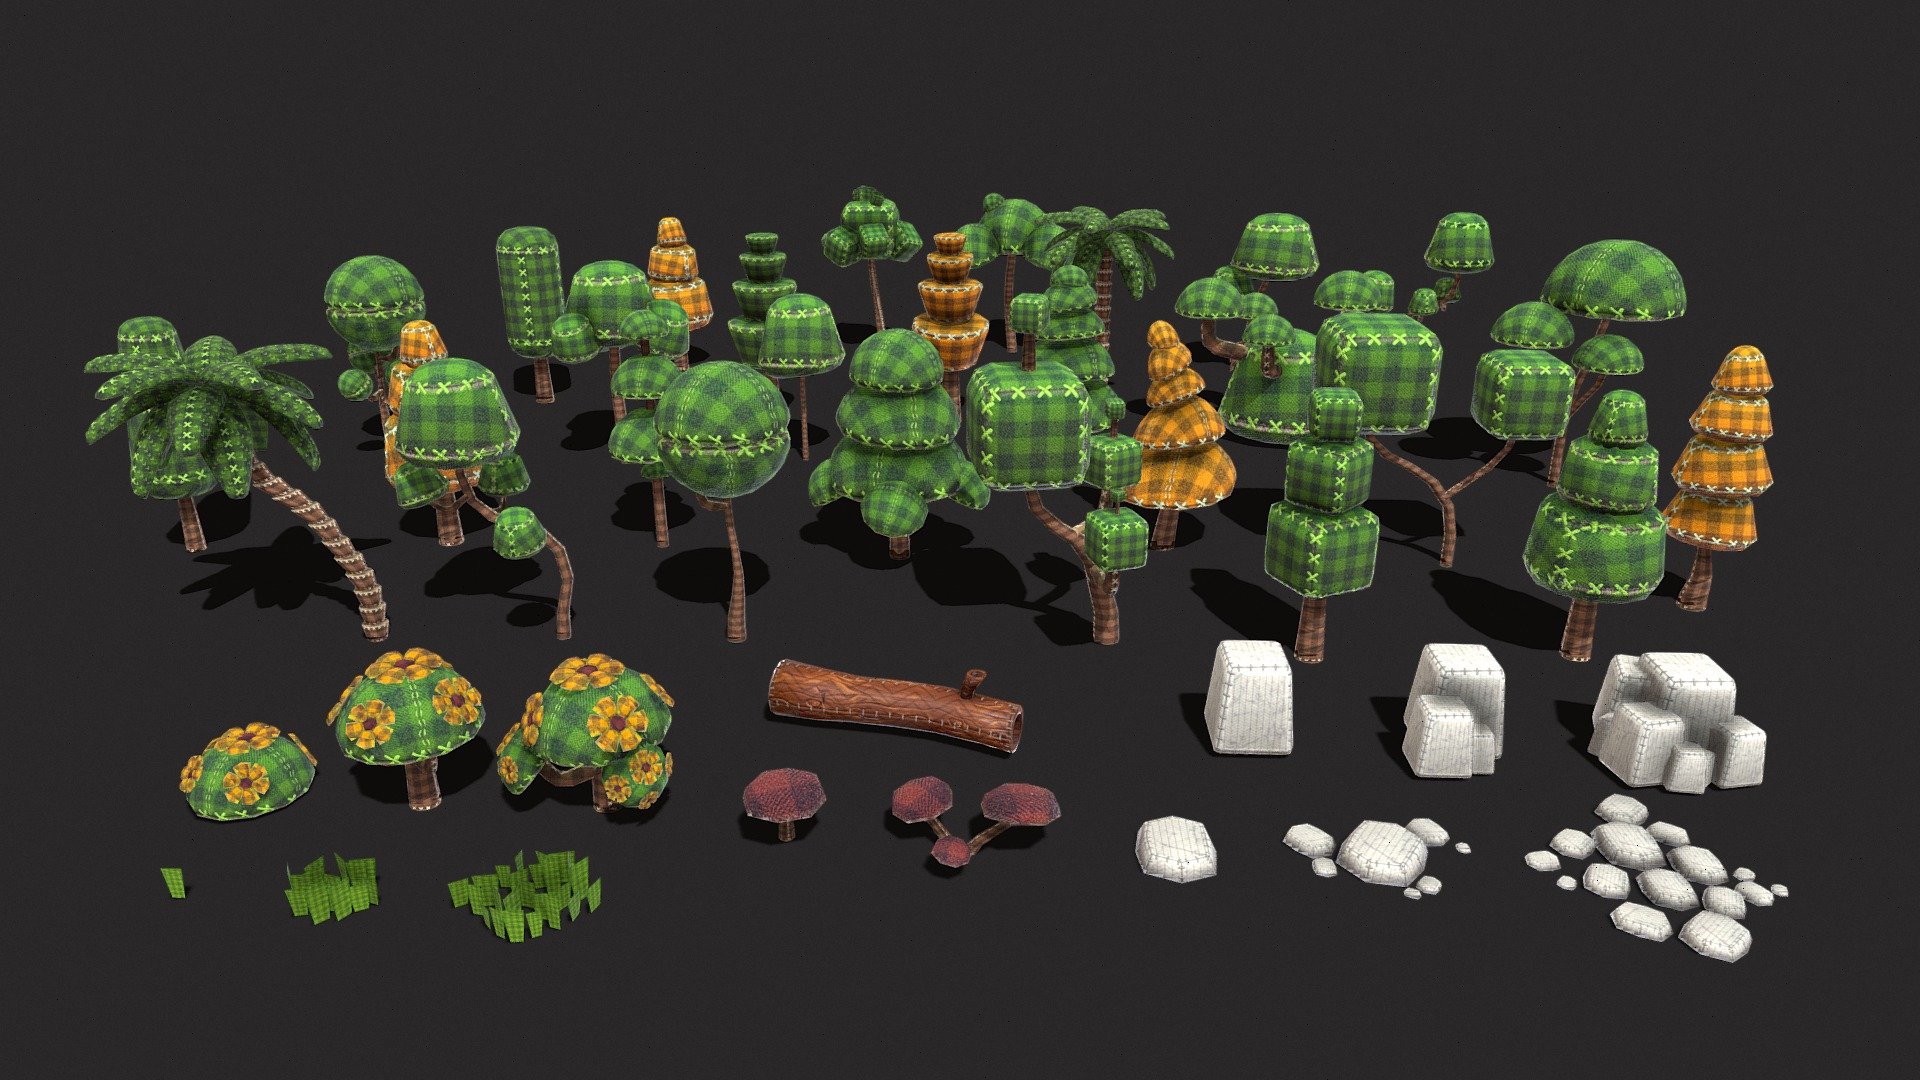 Good day ^_^ I hope you will like this Low Poly Stylize Nature Pack as much as i do. this is modeled in blender and textured in substance painter. 

This Pack contains: 43 Unique models




Tree: 28

Plant: 3

Mushroom: 2

Trunk: 1

Grass: 3

Rock: 3

Stone: 3

Checkout my other Low poly Vegetation Packs:







Flower and plant 01







Flower and plant 02







Flower pack







Tree pack







Stylize Plant pack 03



 - Low Poly Stylize Nature Pack - Buy Royalty Free 3D model by LowPolyBoy 3d model